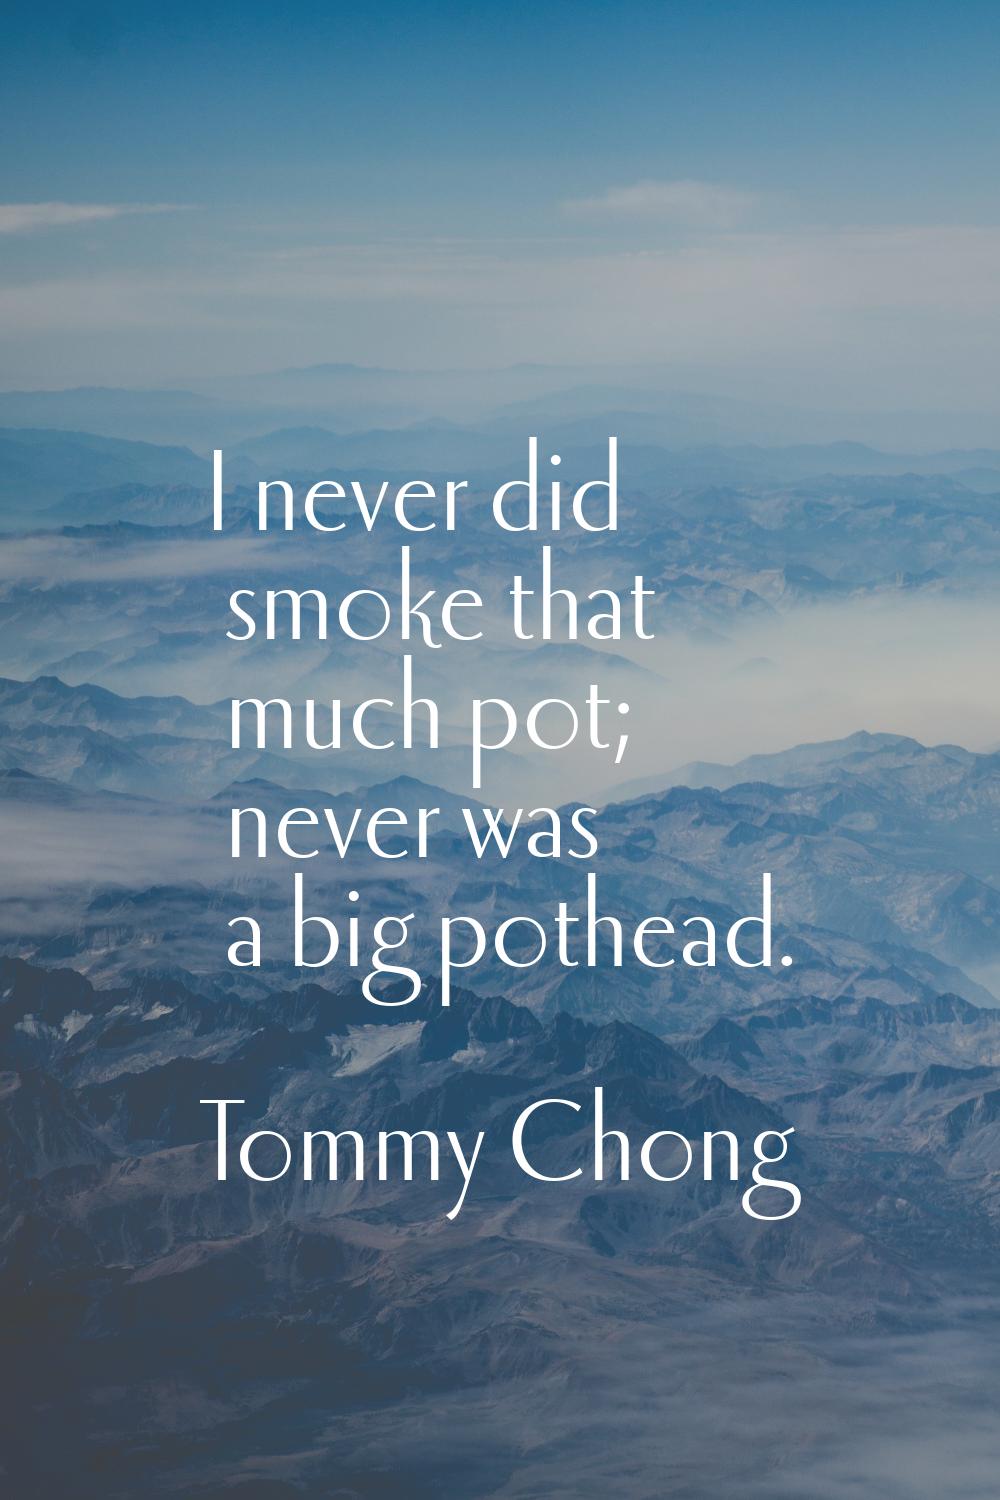 I never did smoke that much pot; never was a big pothead.